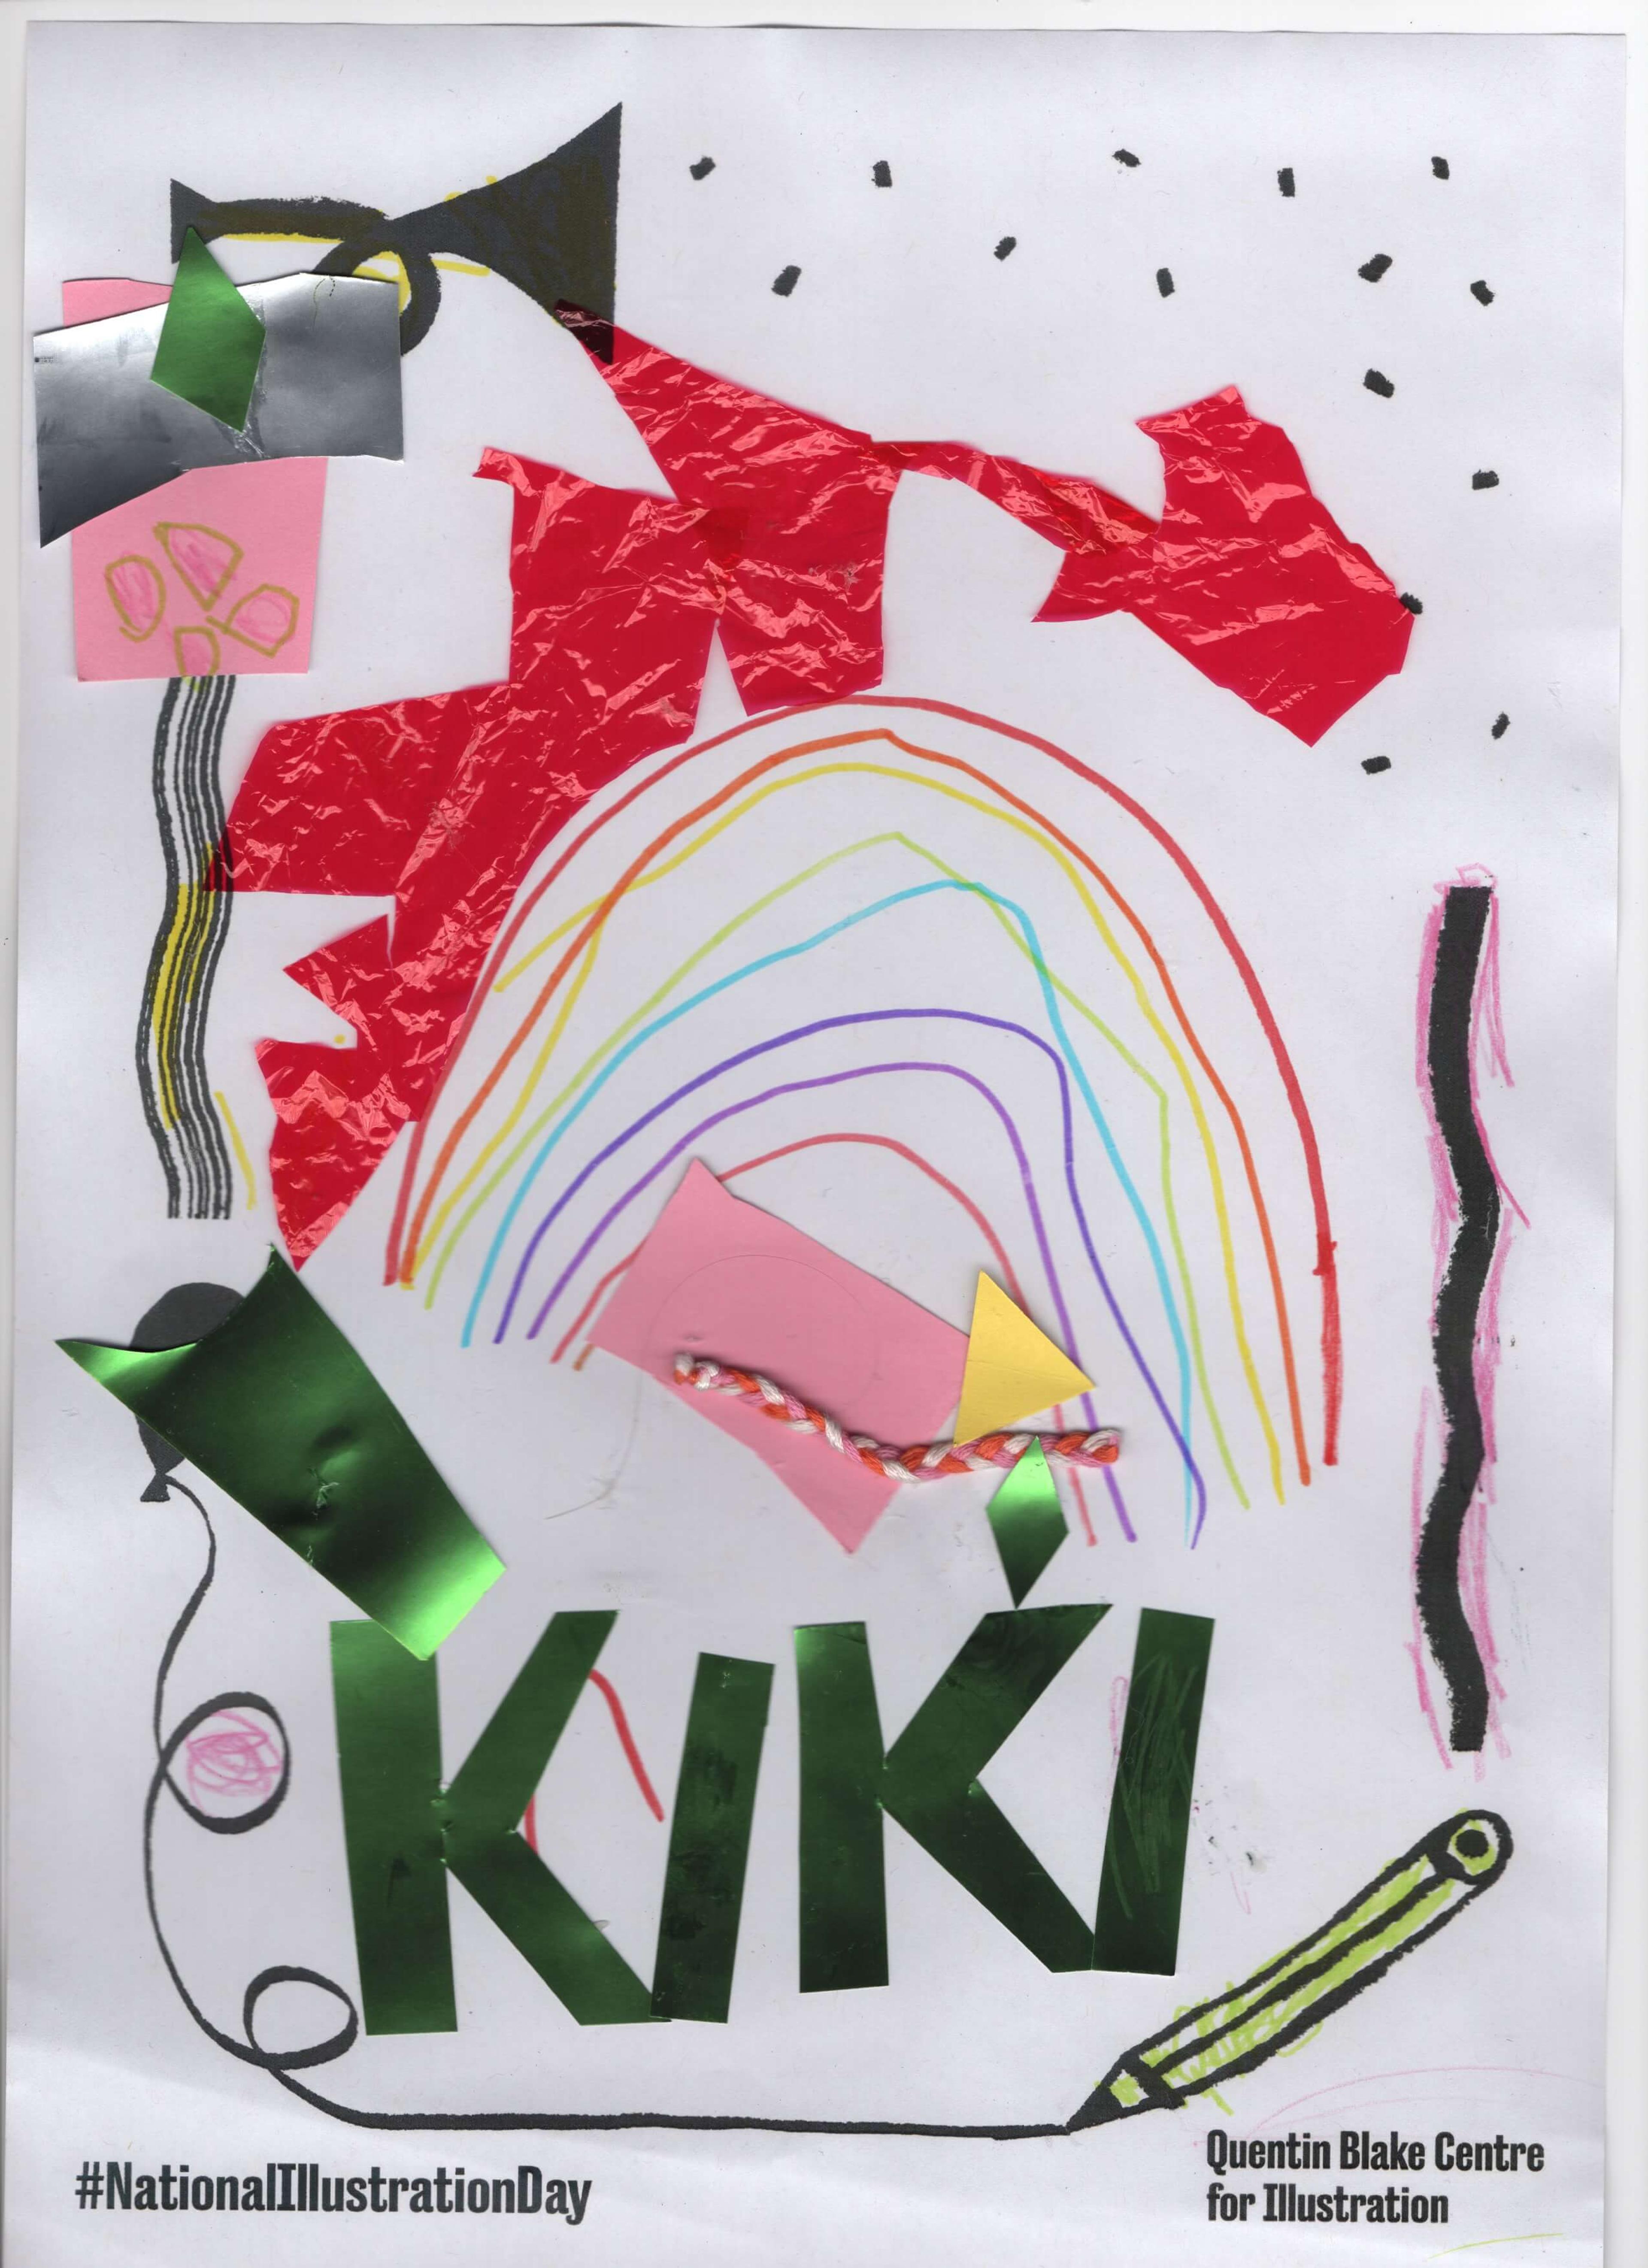 A rainbow surrounded by abstract pieces of collaged paper and the name 'Kiki' written using iridescent green paper.